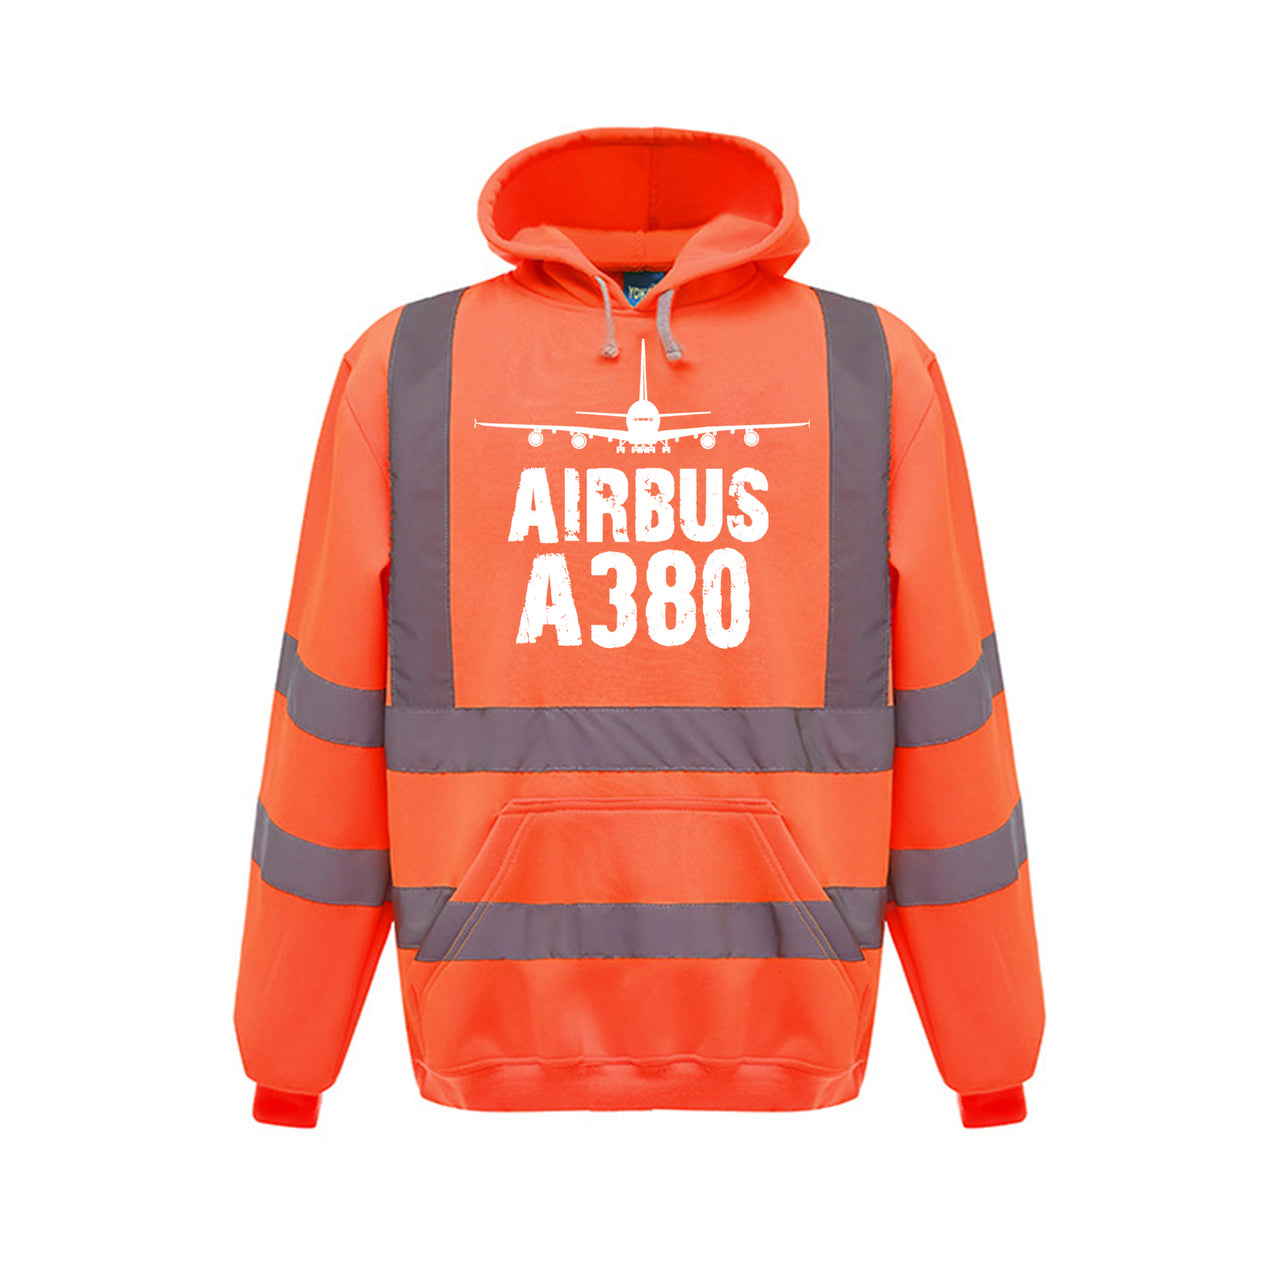 Airbus A380 & Plane Designed Reflective Hoodies